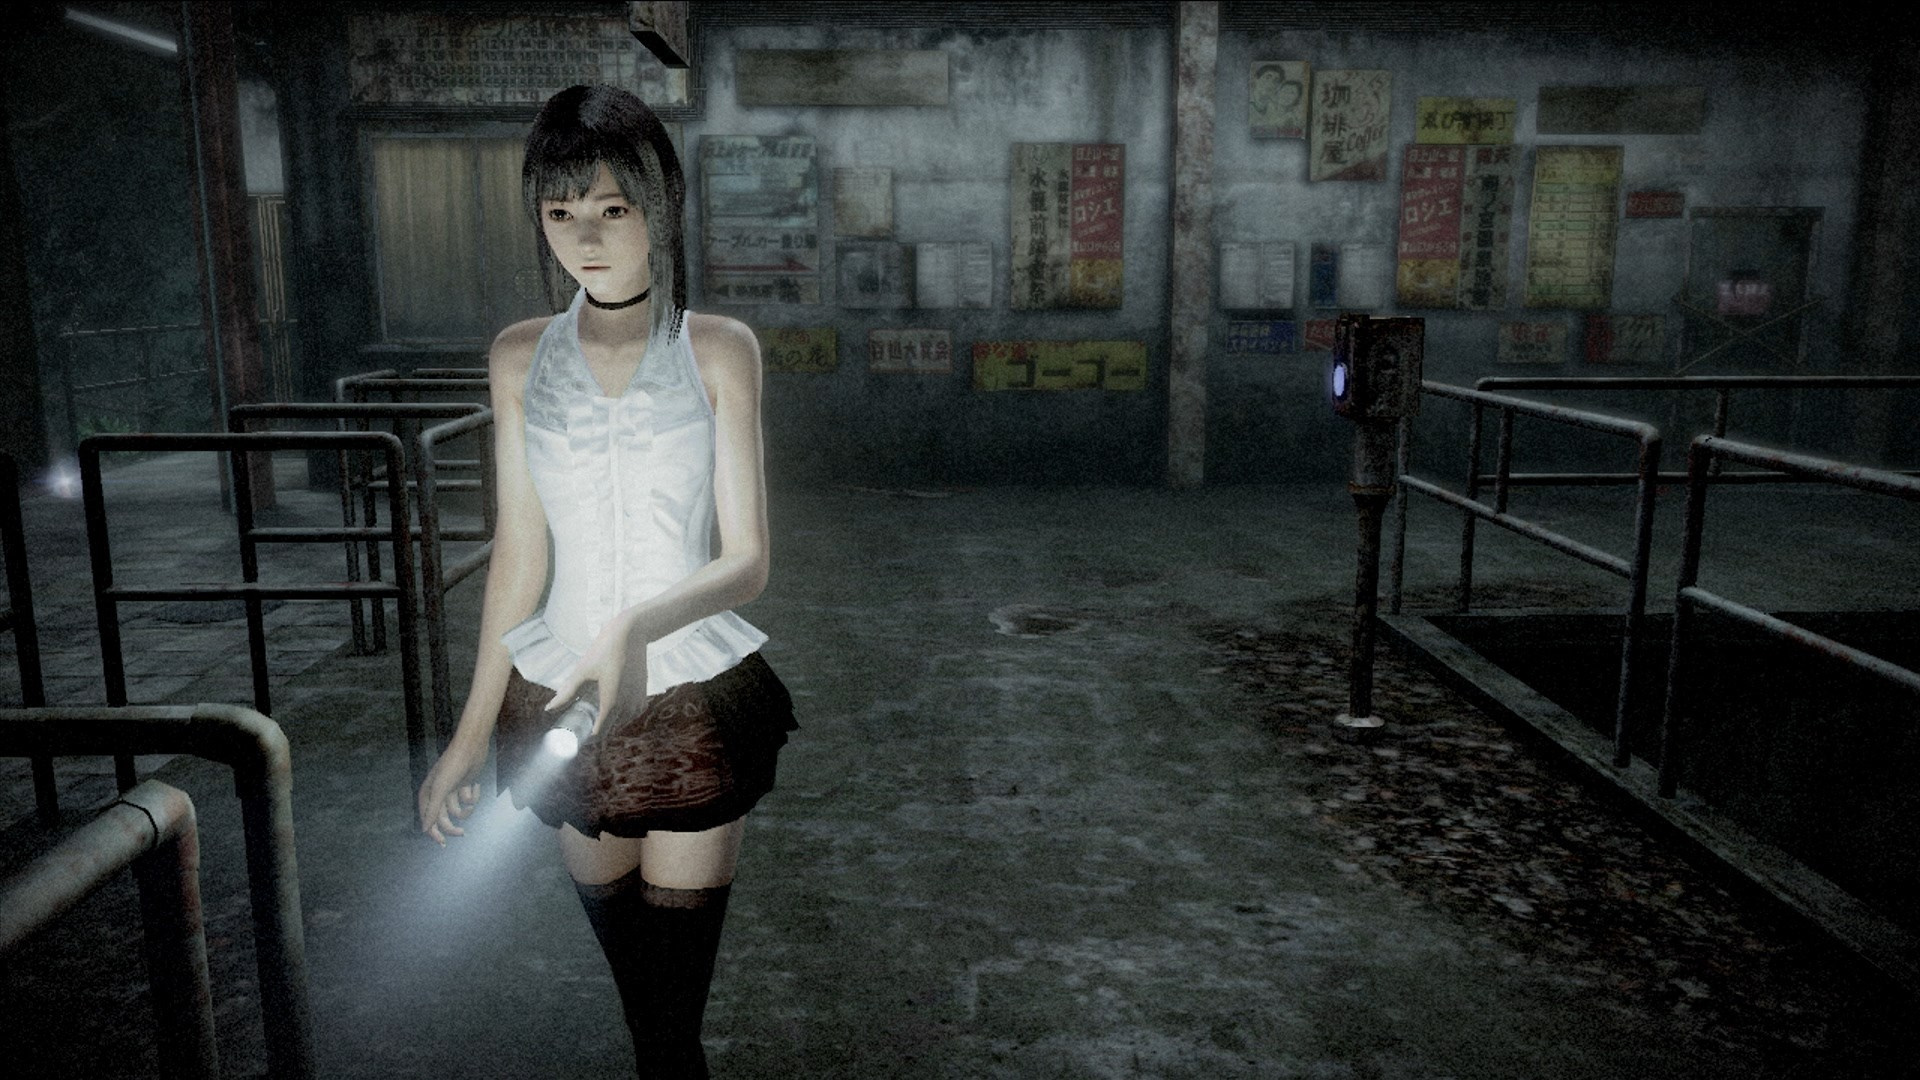 fatal frame maiden of black water pc download download free